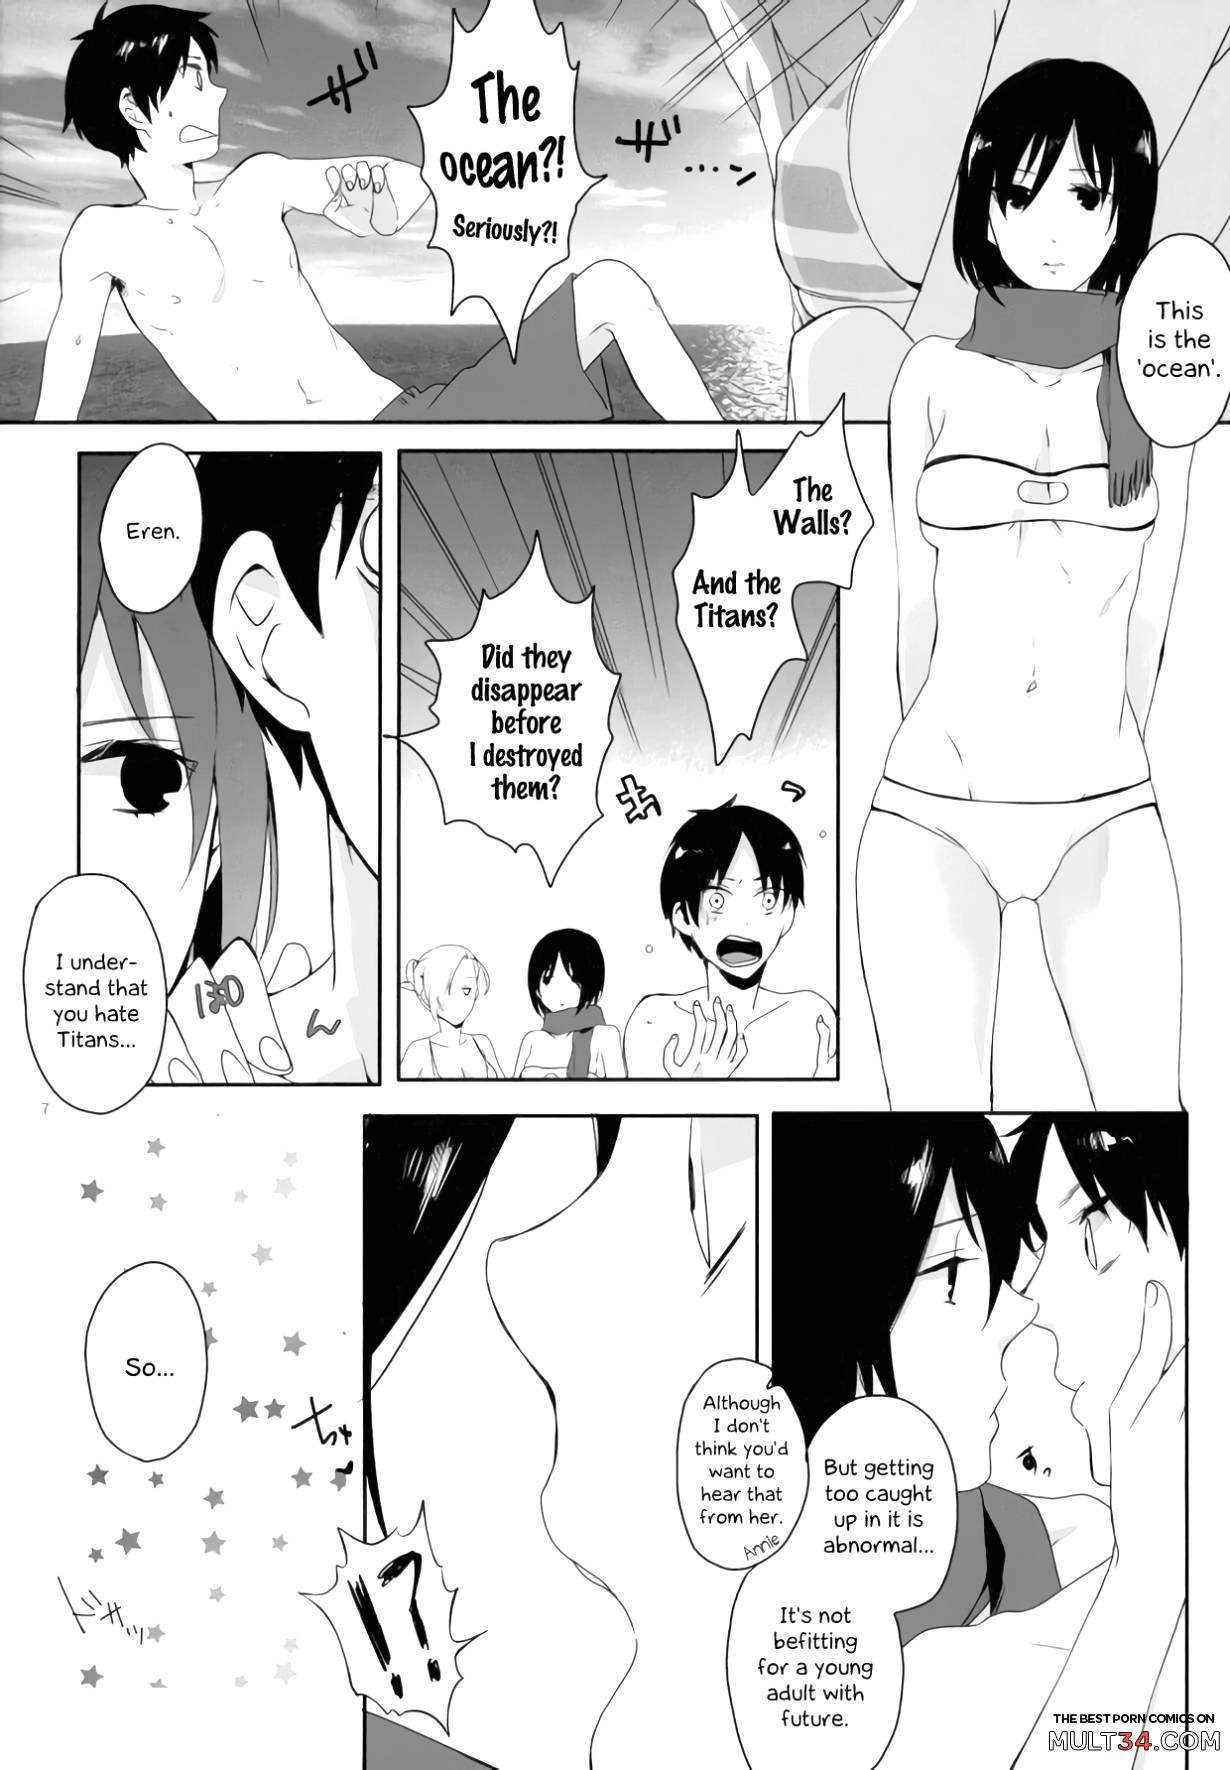 ATTACK ON GIRLS page 4